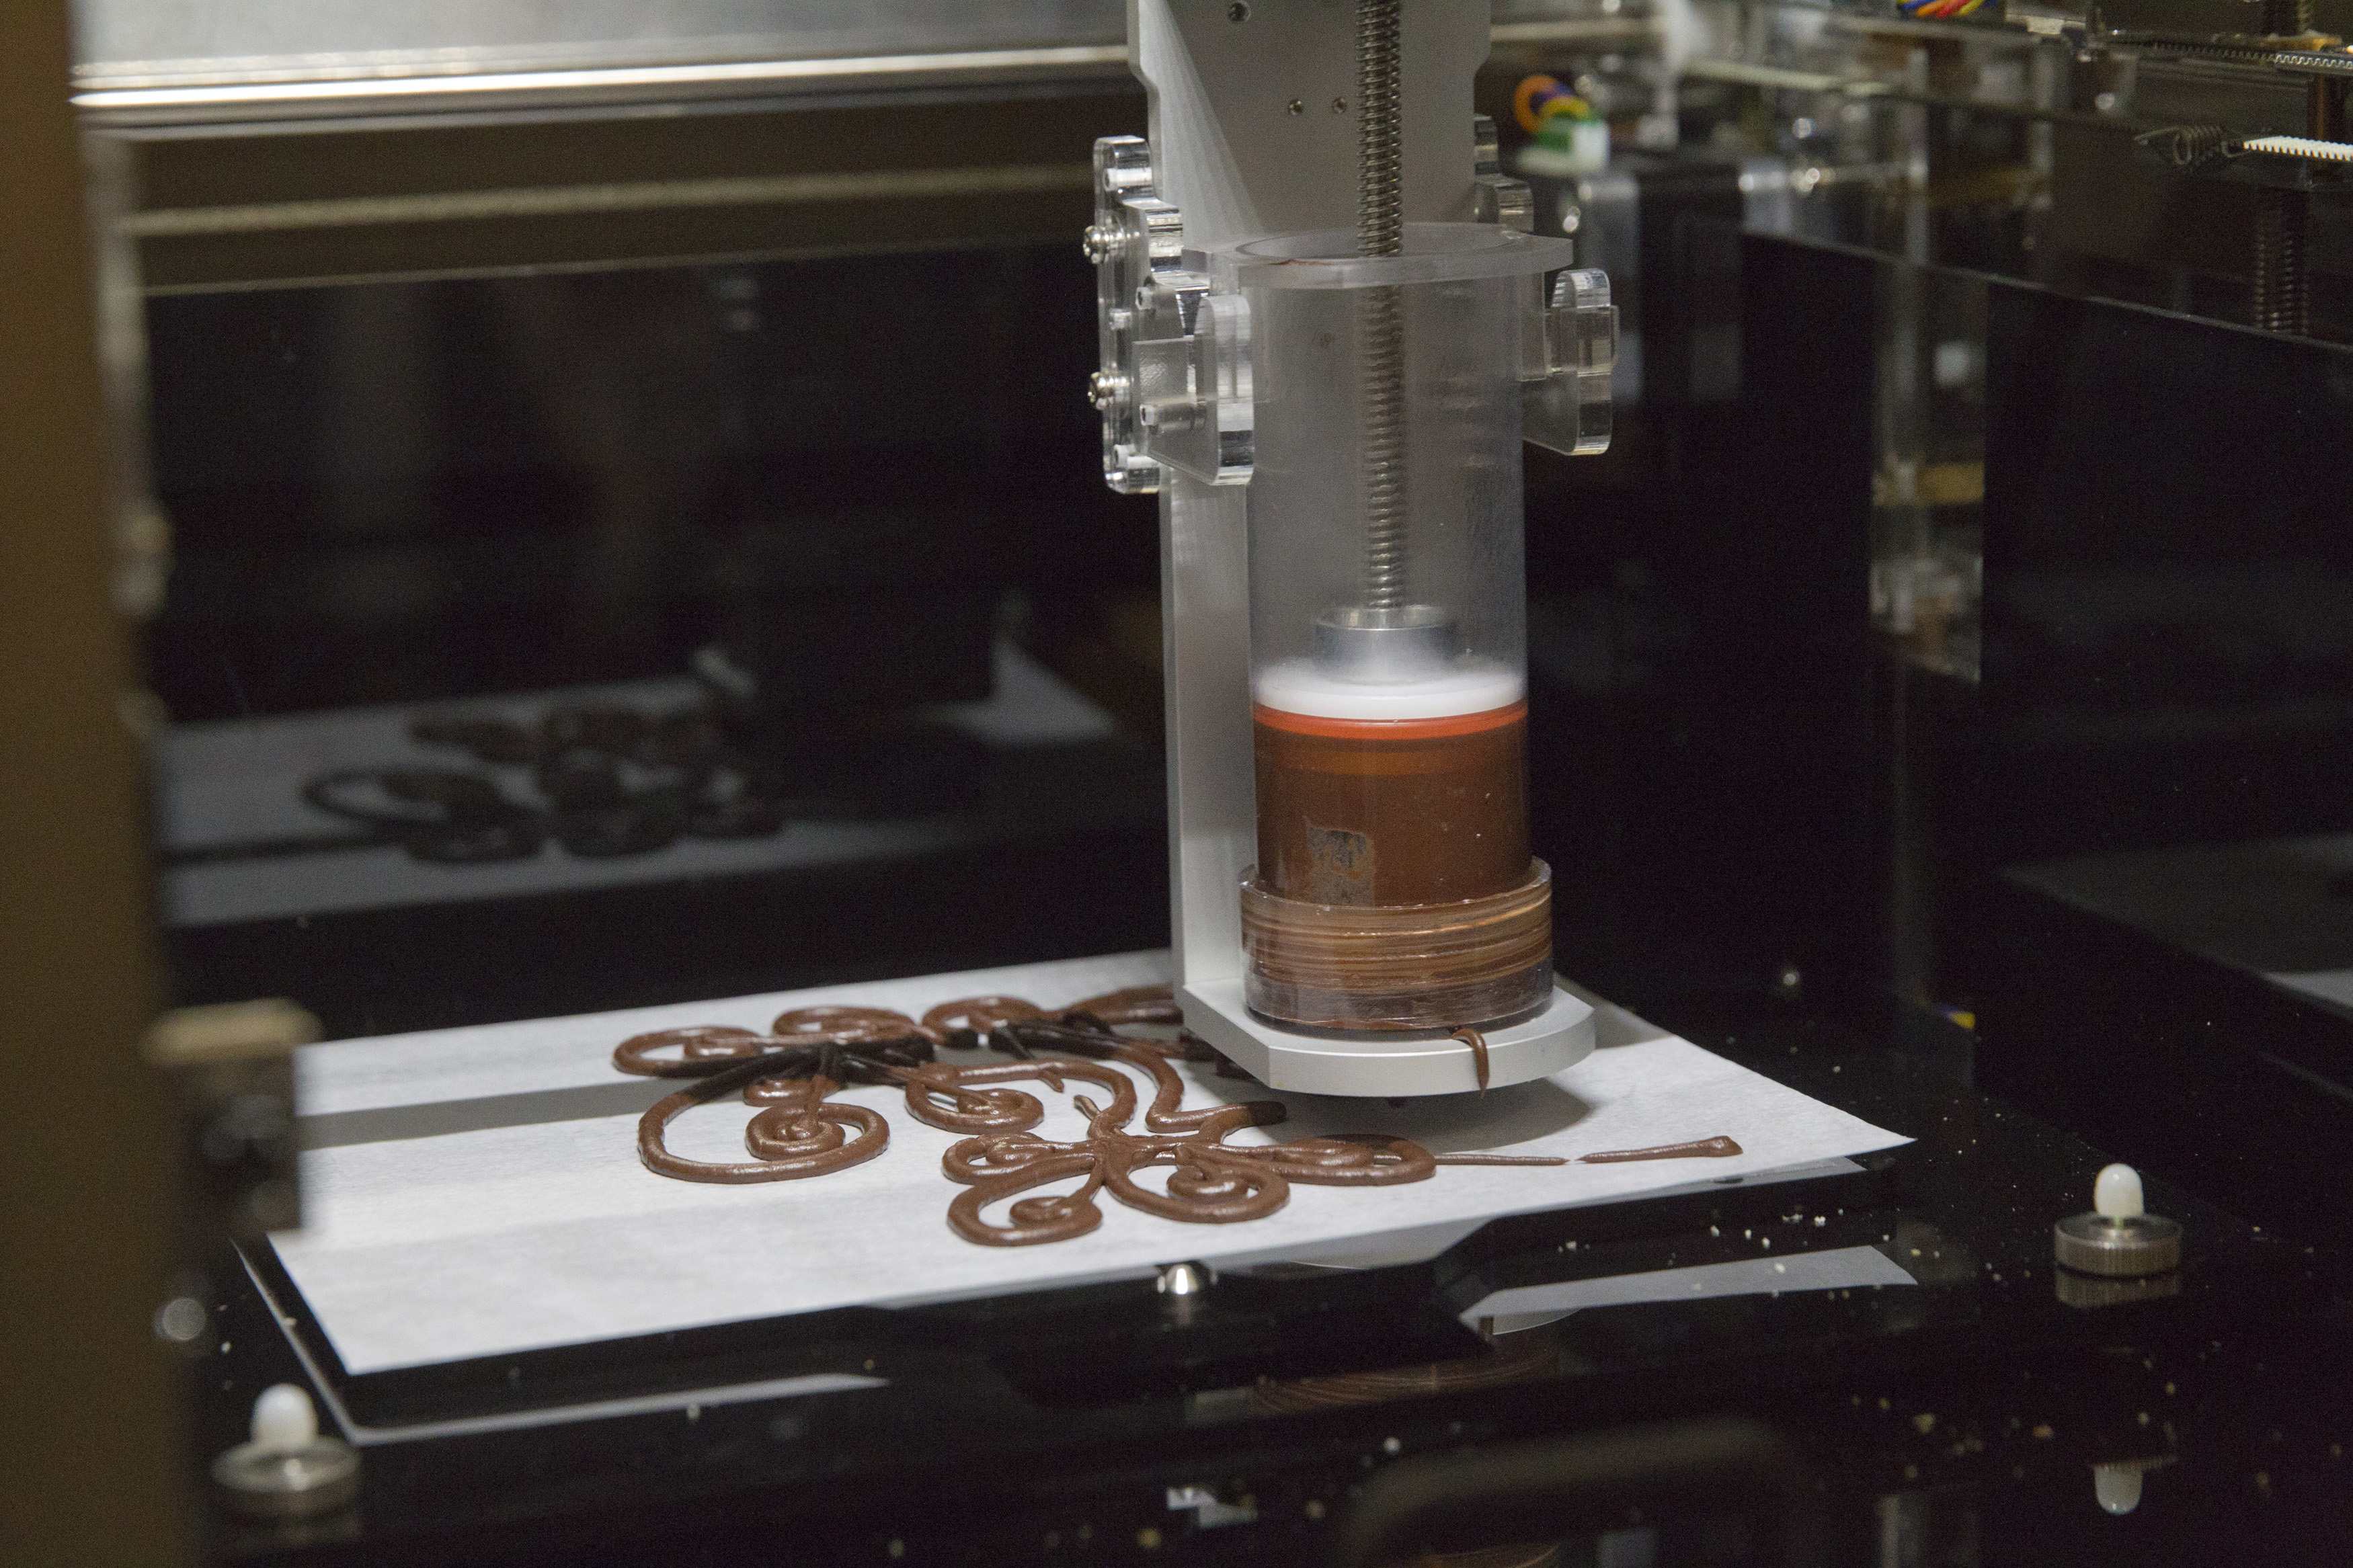 3D food printer by XYZprinting Inc. is demonstrated during the 2015 International Consumer Electronics Show in Las Vegas